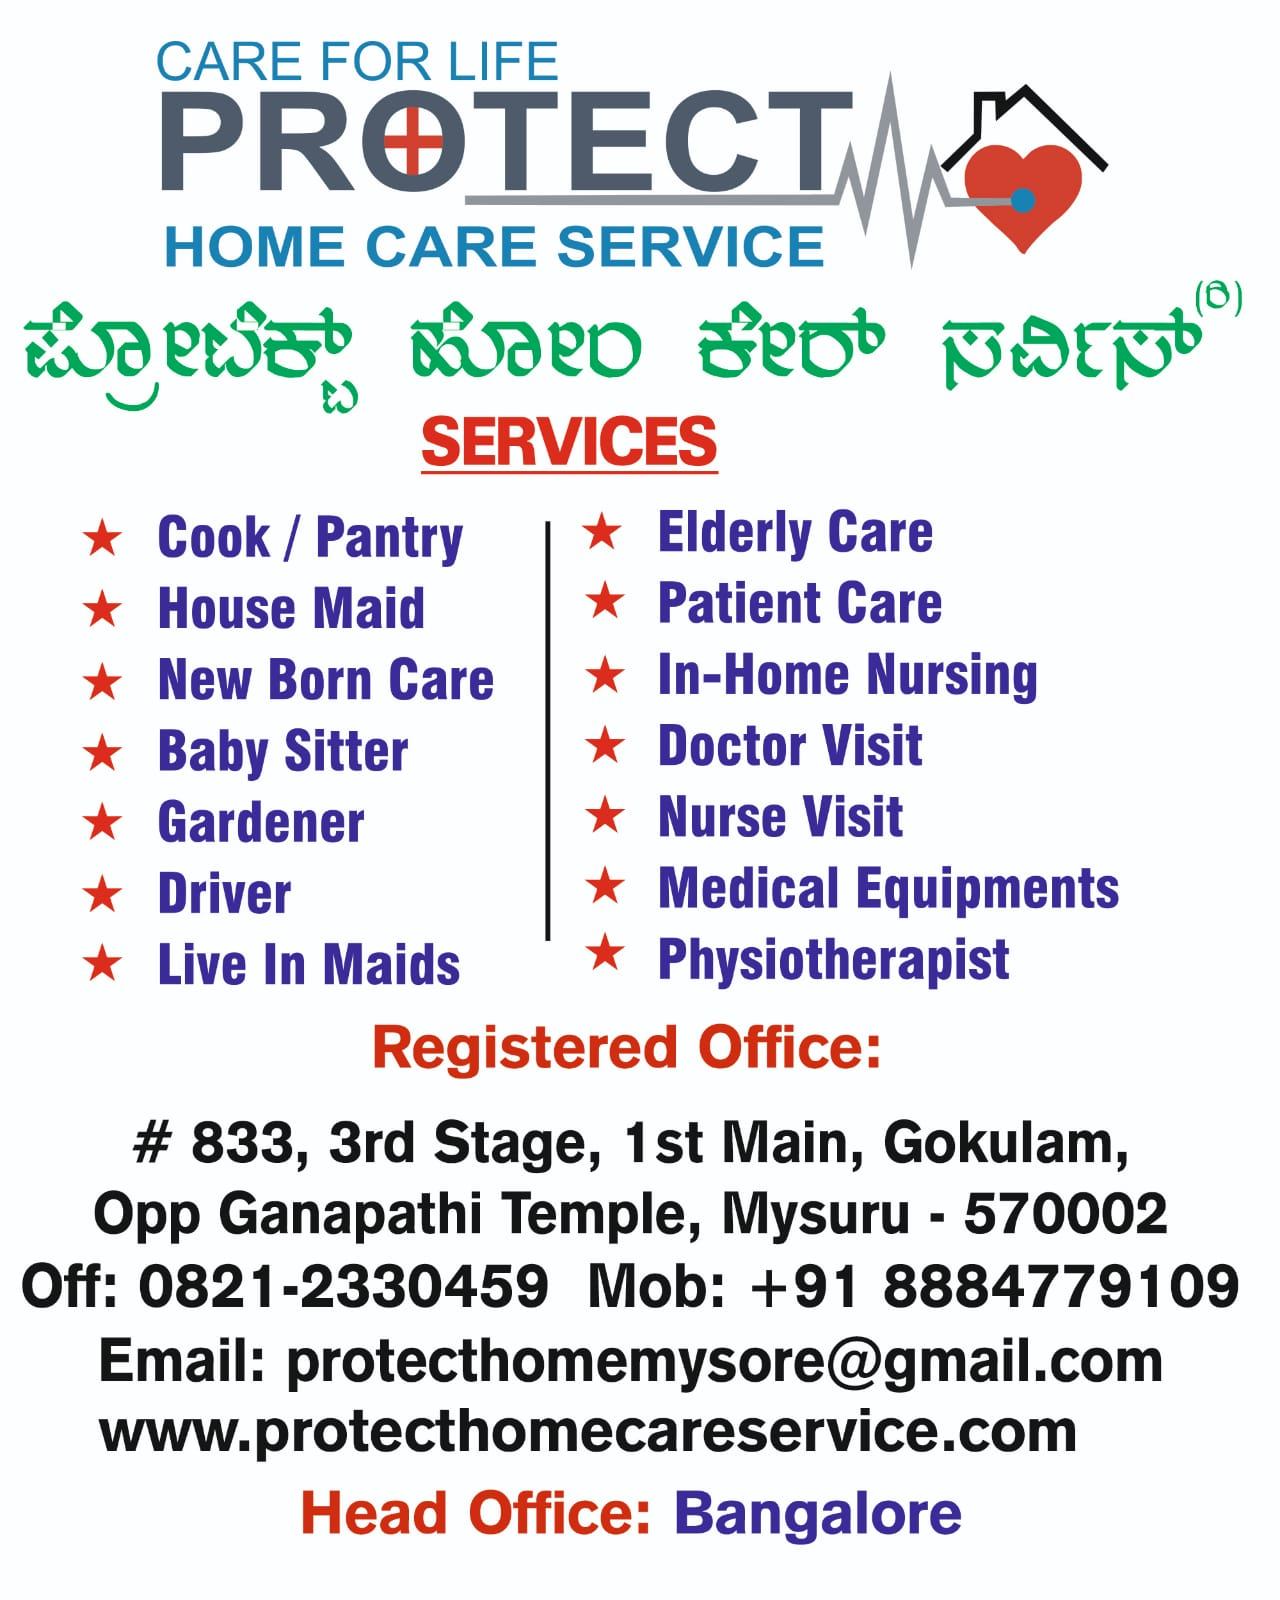 Maid/ Domestic help, Cooking service, Elderly Care, Child Care, Other domestic services; Exp: More than 5 year